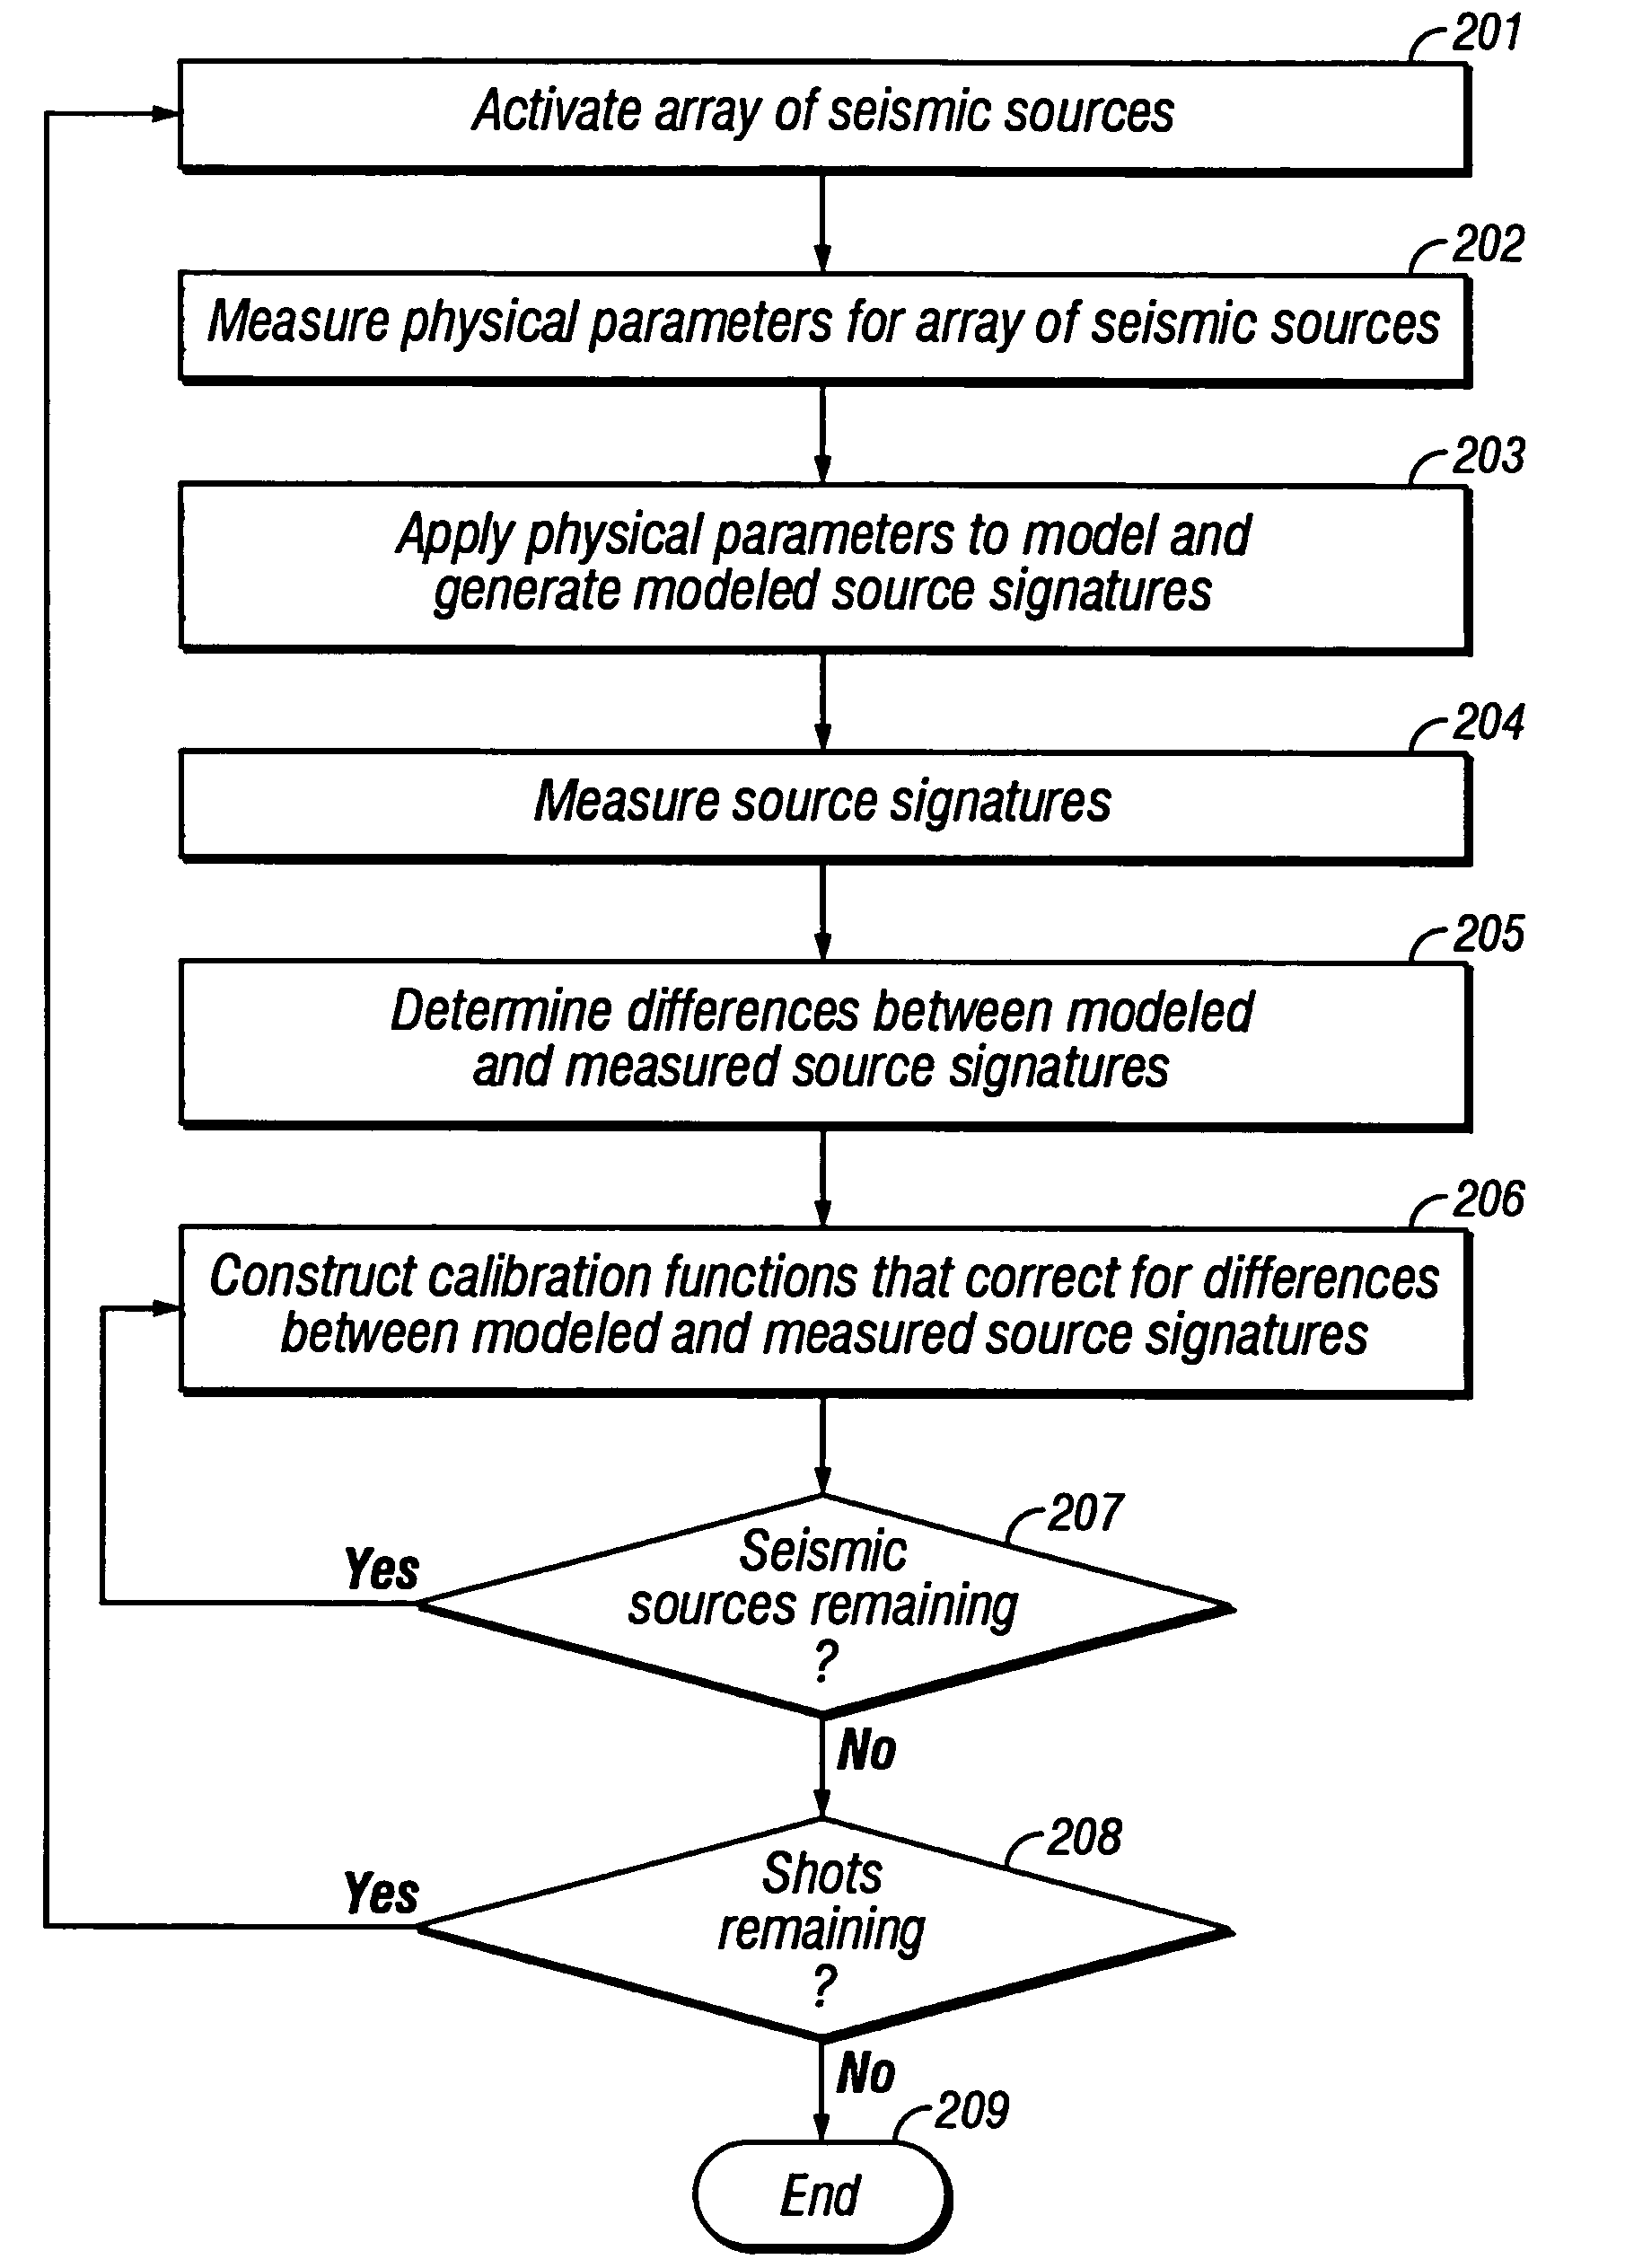 Method of seismic source monitoring using modeled source signatures with calibration functions